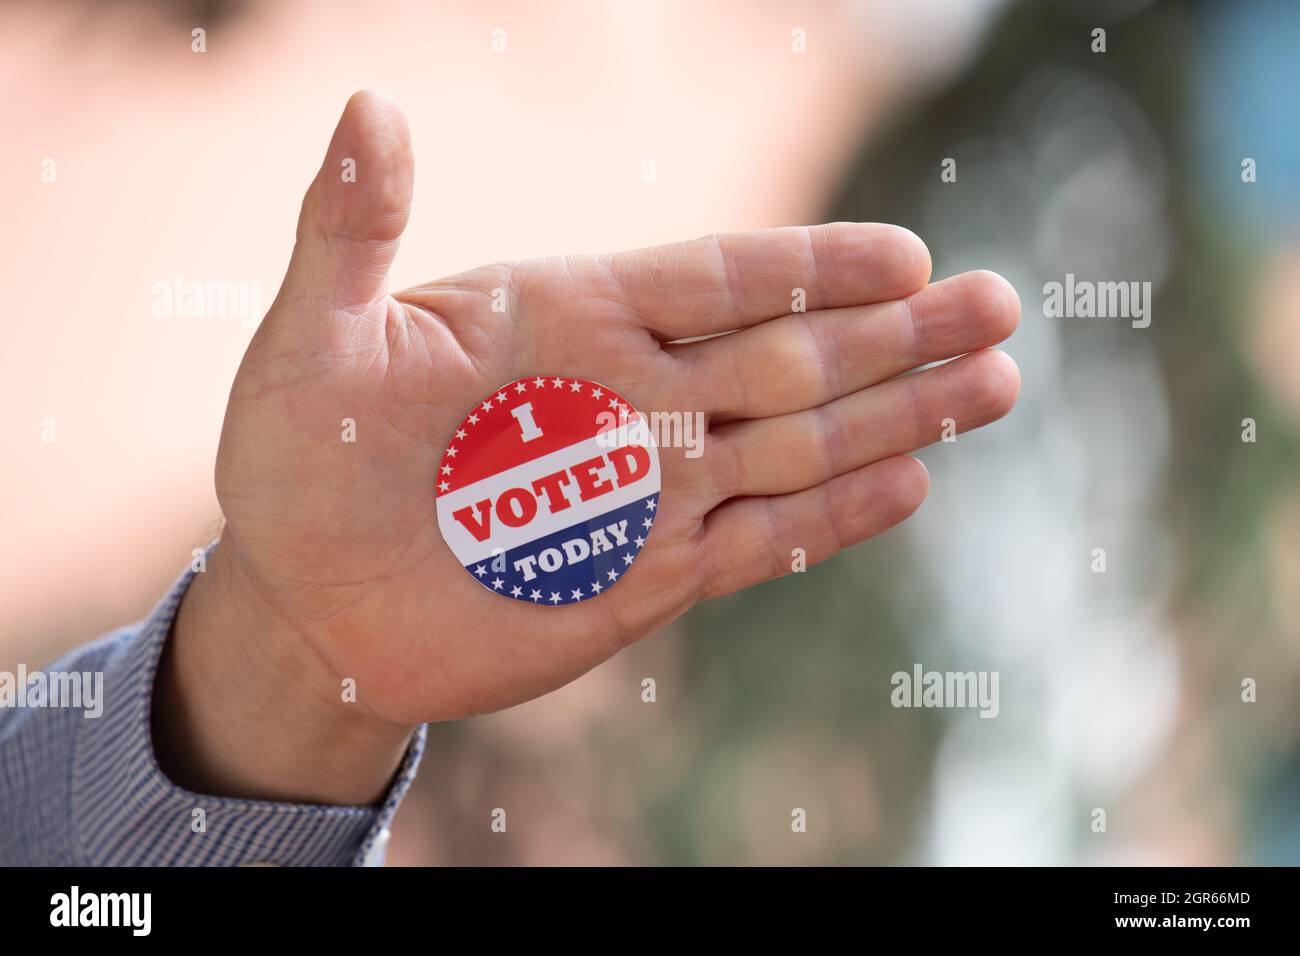 Cropped Hand Of Man With Voting Stamp Stock Photo